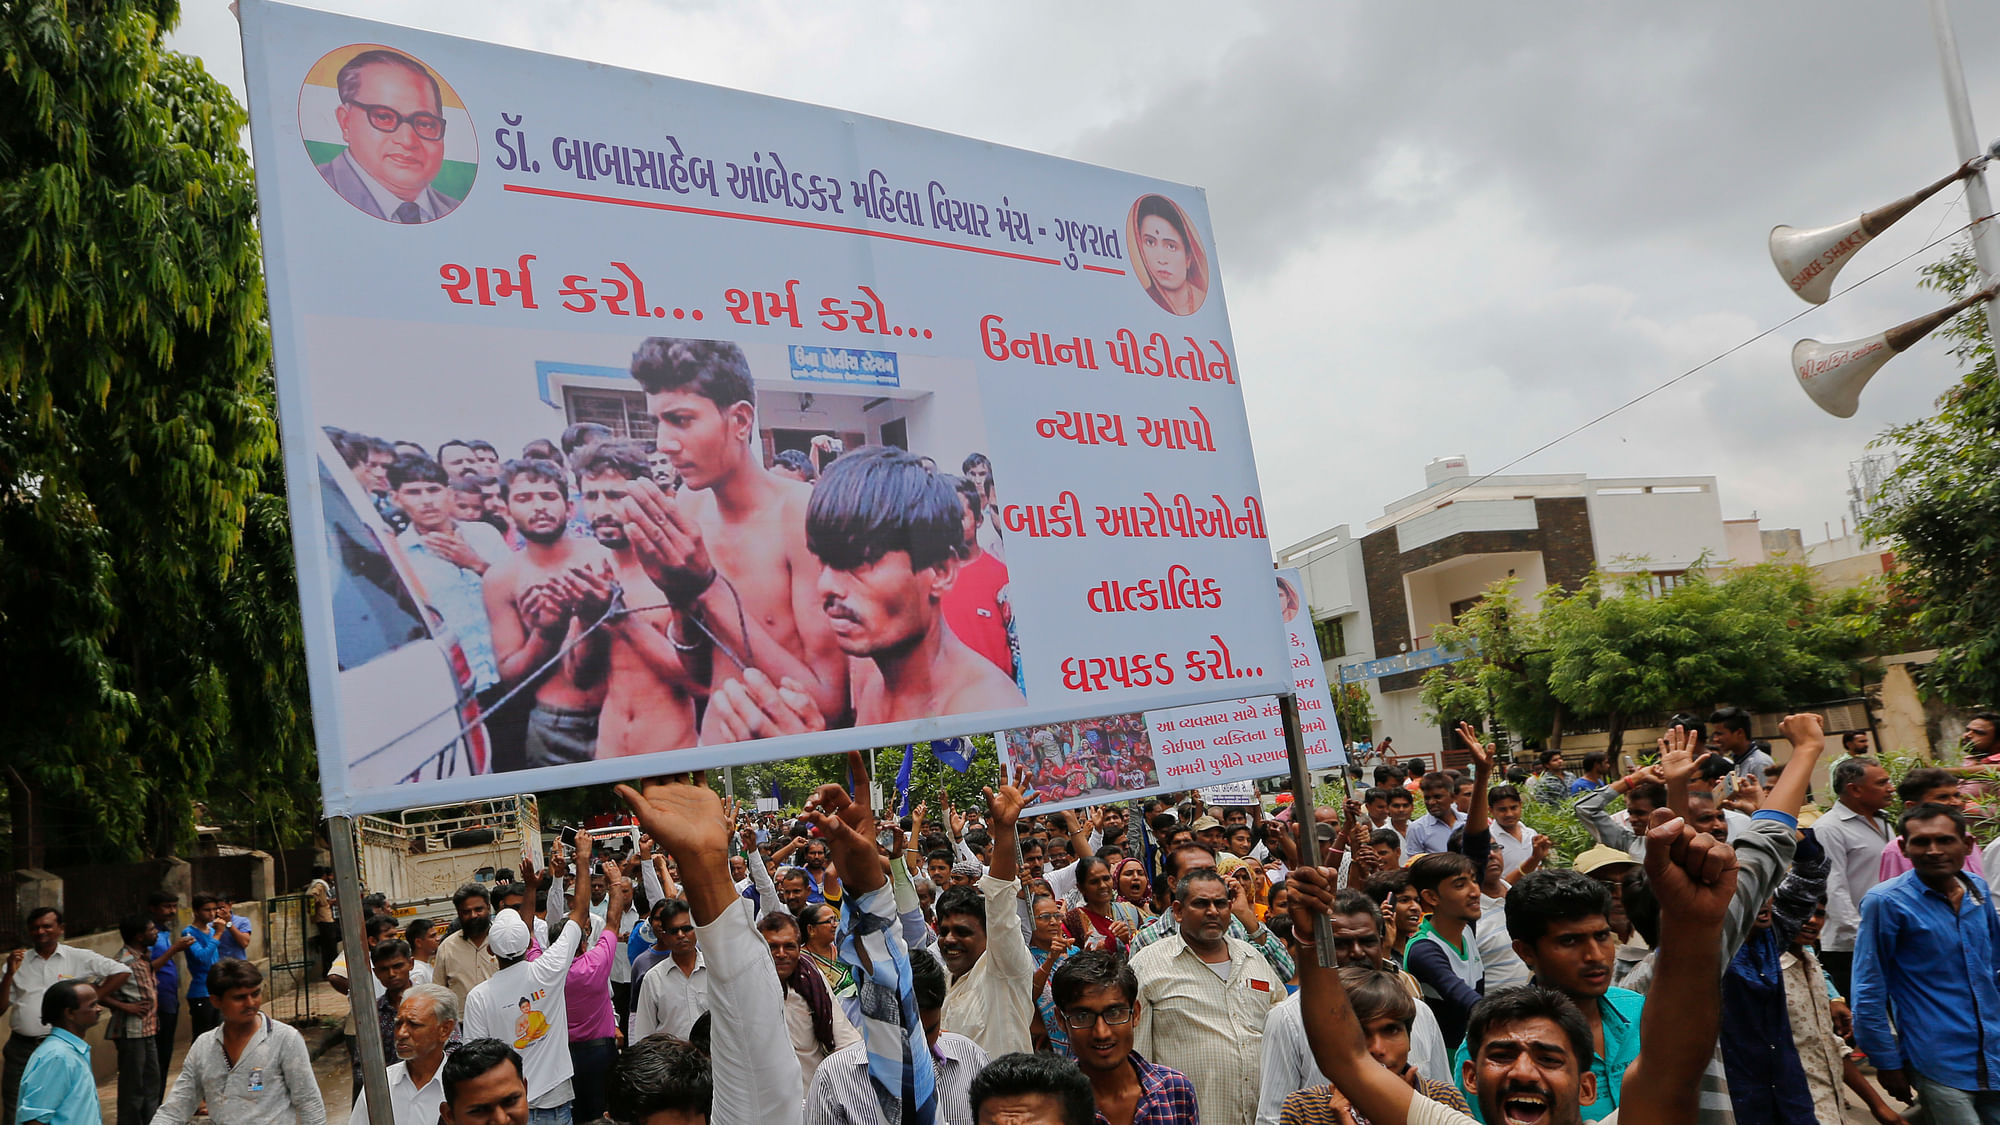 Members of India’s low-caste Dalit community hold a banner as they gather for a rally to protest against the attack on their community members in Ahmadabad, India, Sunday, July 31, 2016.Dalits have been protesting after four men belonging to their community (shown in photograph in the banner) were beaten while trying to skin a dead cow in Una in western Gujarat state early this month. The banner in Gujarati reads “shame shame, Give justice to Una victims, immediately arrest rest accused”. (Photo: AP)